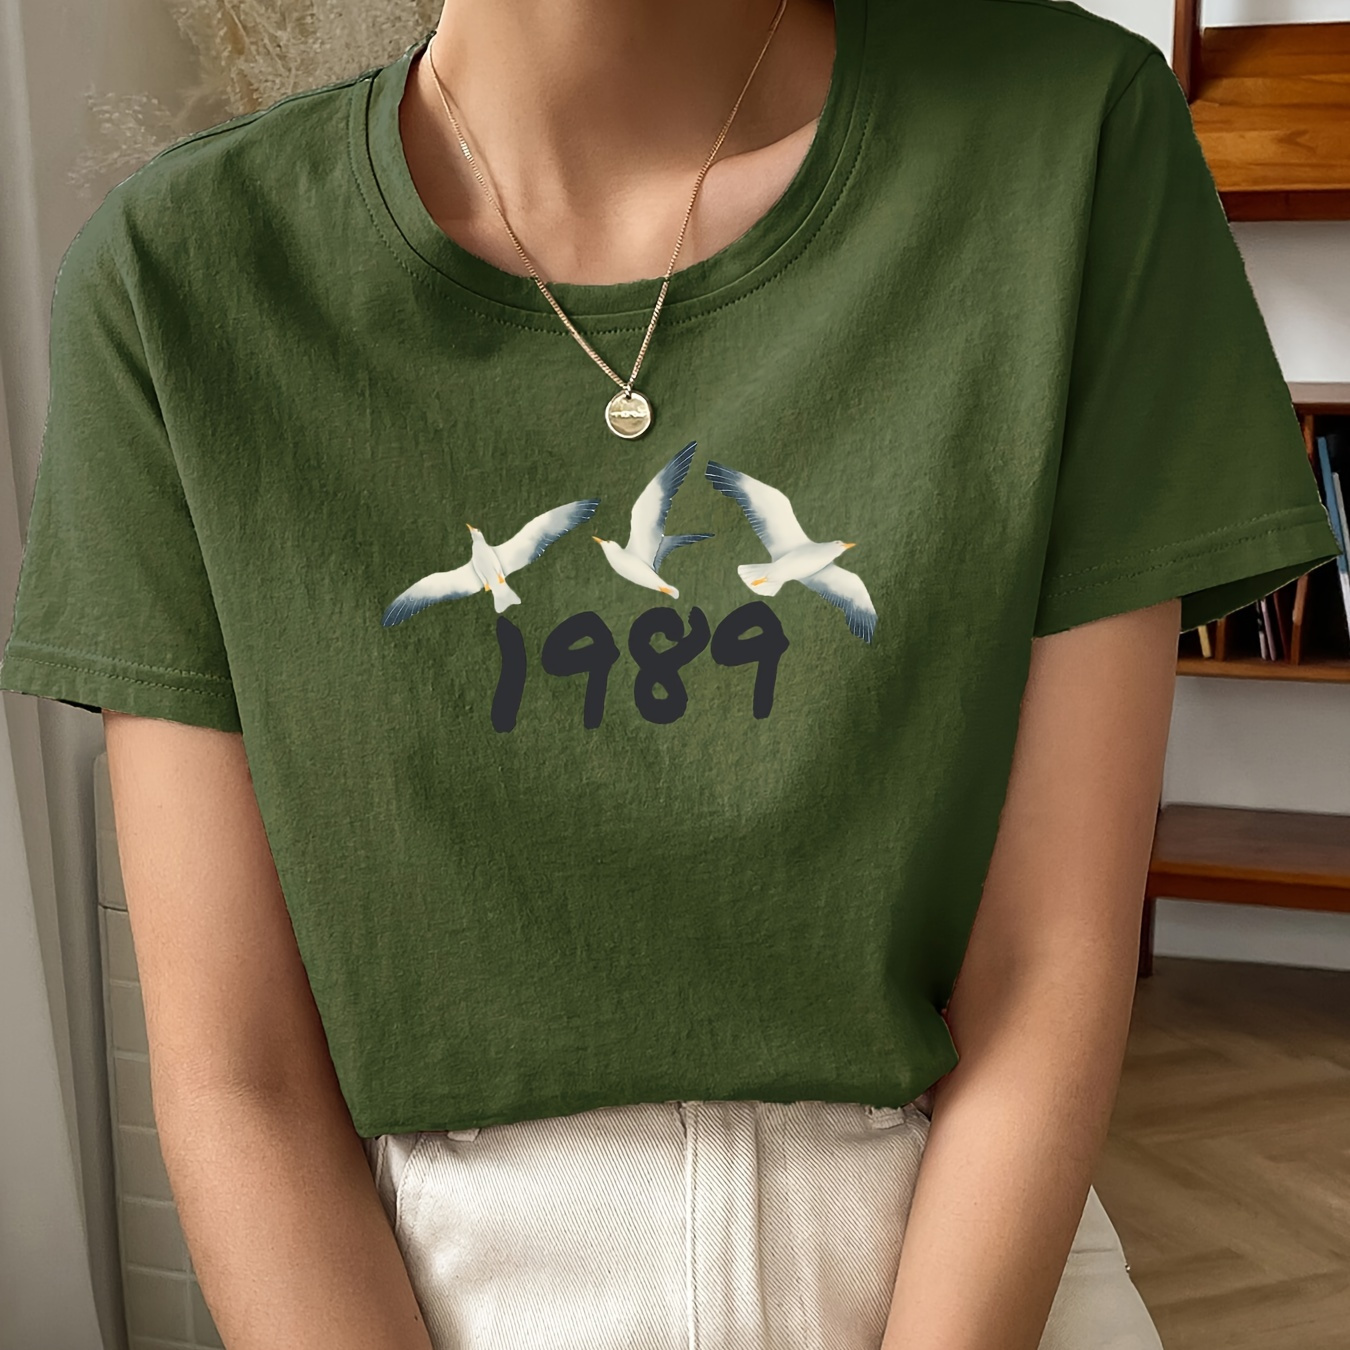 

Seagull & Number 1989 Pattern Versatile T-shirt, Round Neck Short Sleeves Stretchy Casual Tee, Women's Tops